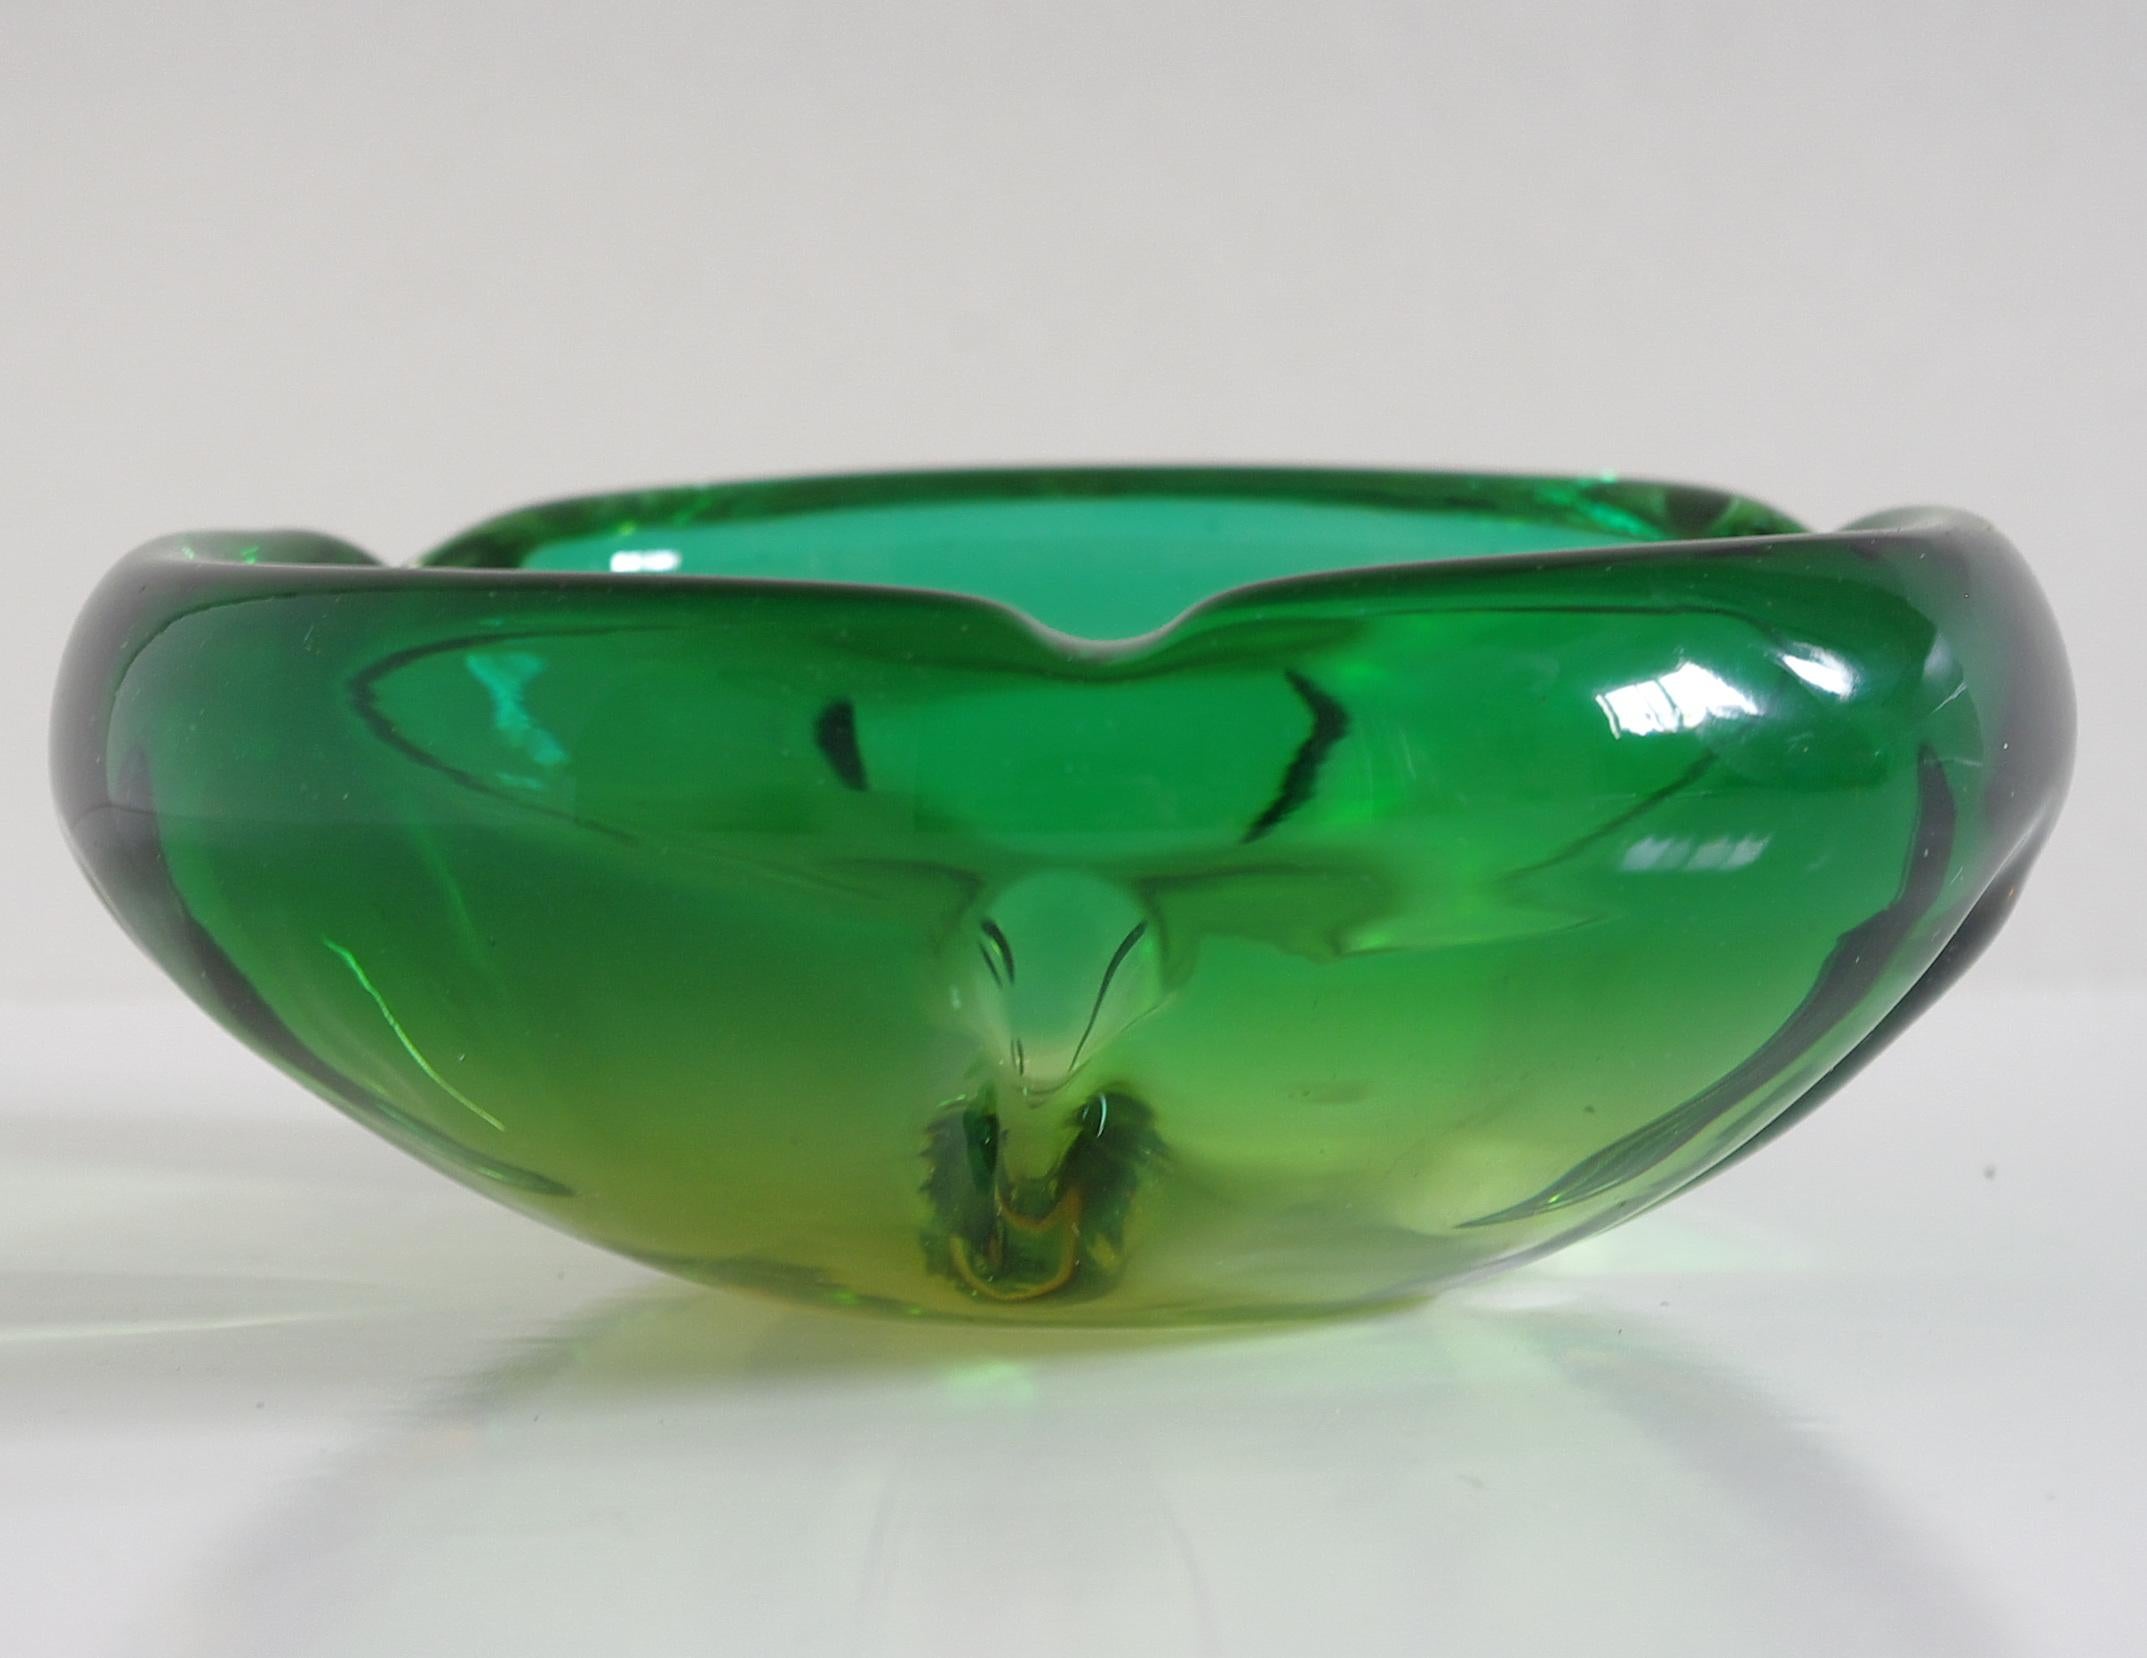 Italian green and amber ashtray or bowl.
This piece is a great addition to your Christmas and holiday home decor and would be a unique gift!!!